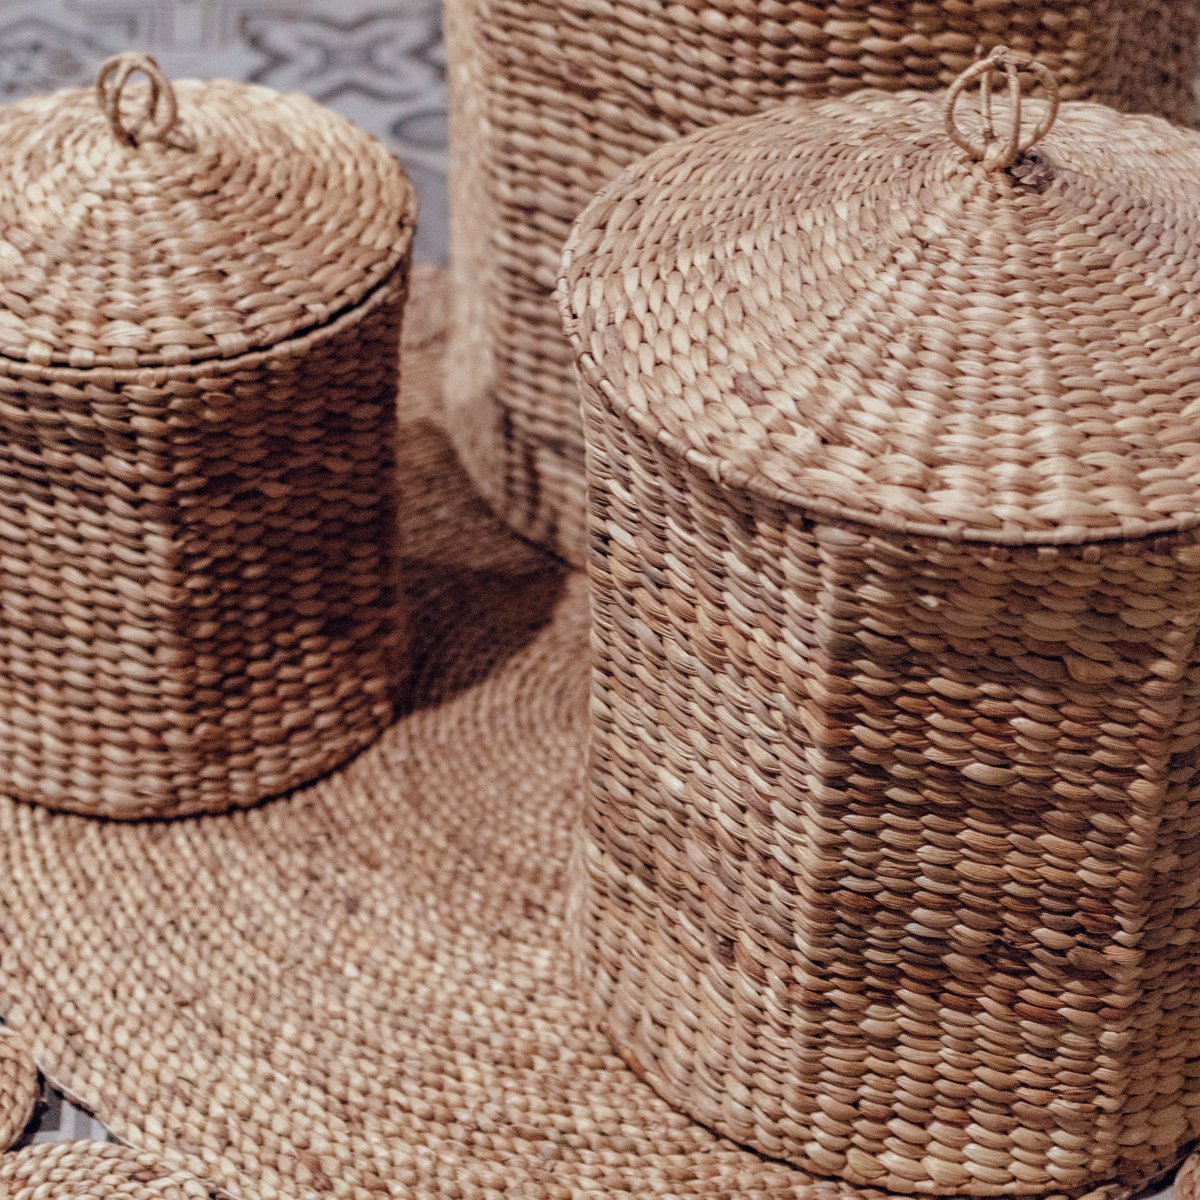 Laundry Basket with Lid GARUT made from Water Hyacinth (3 sizes)